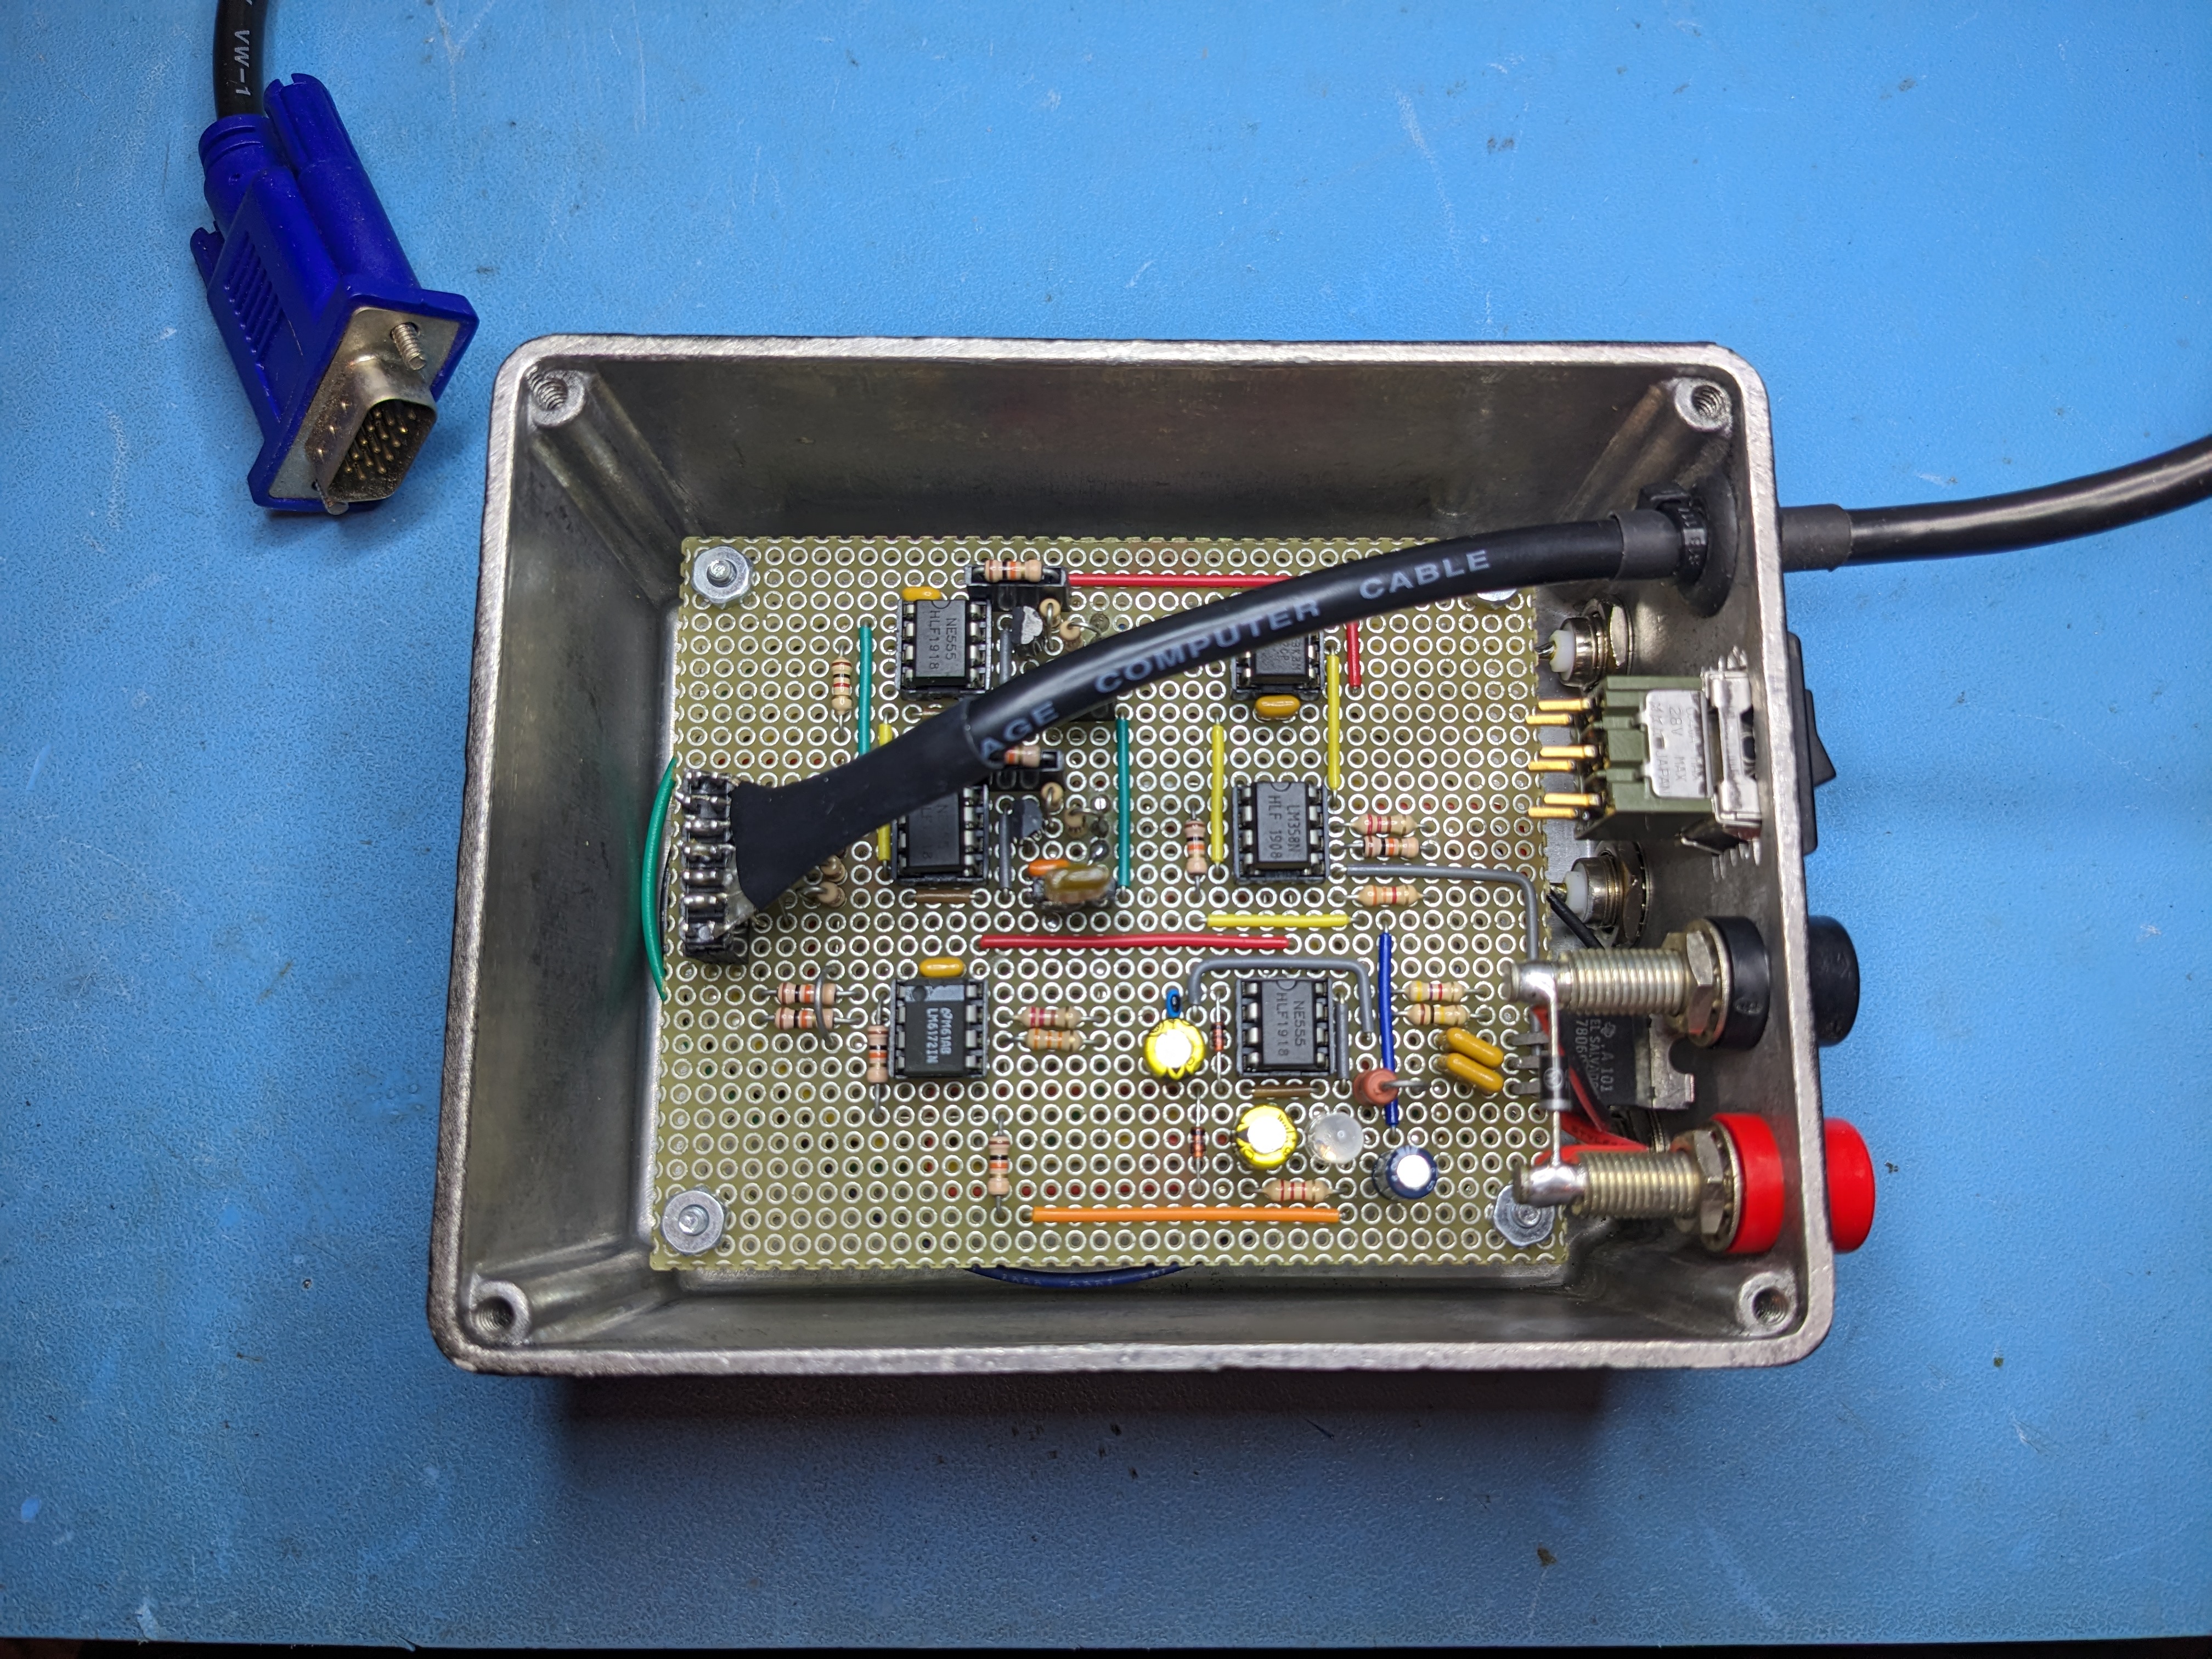 Photo with the lid off the converter showing circuit components